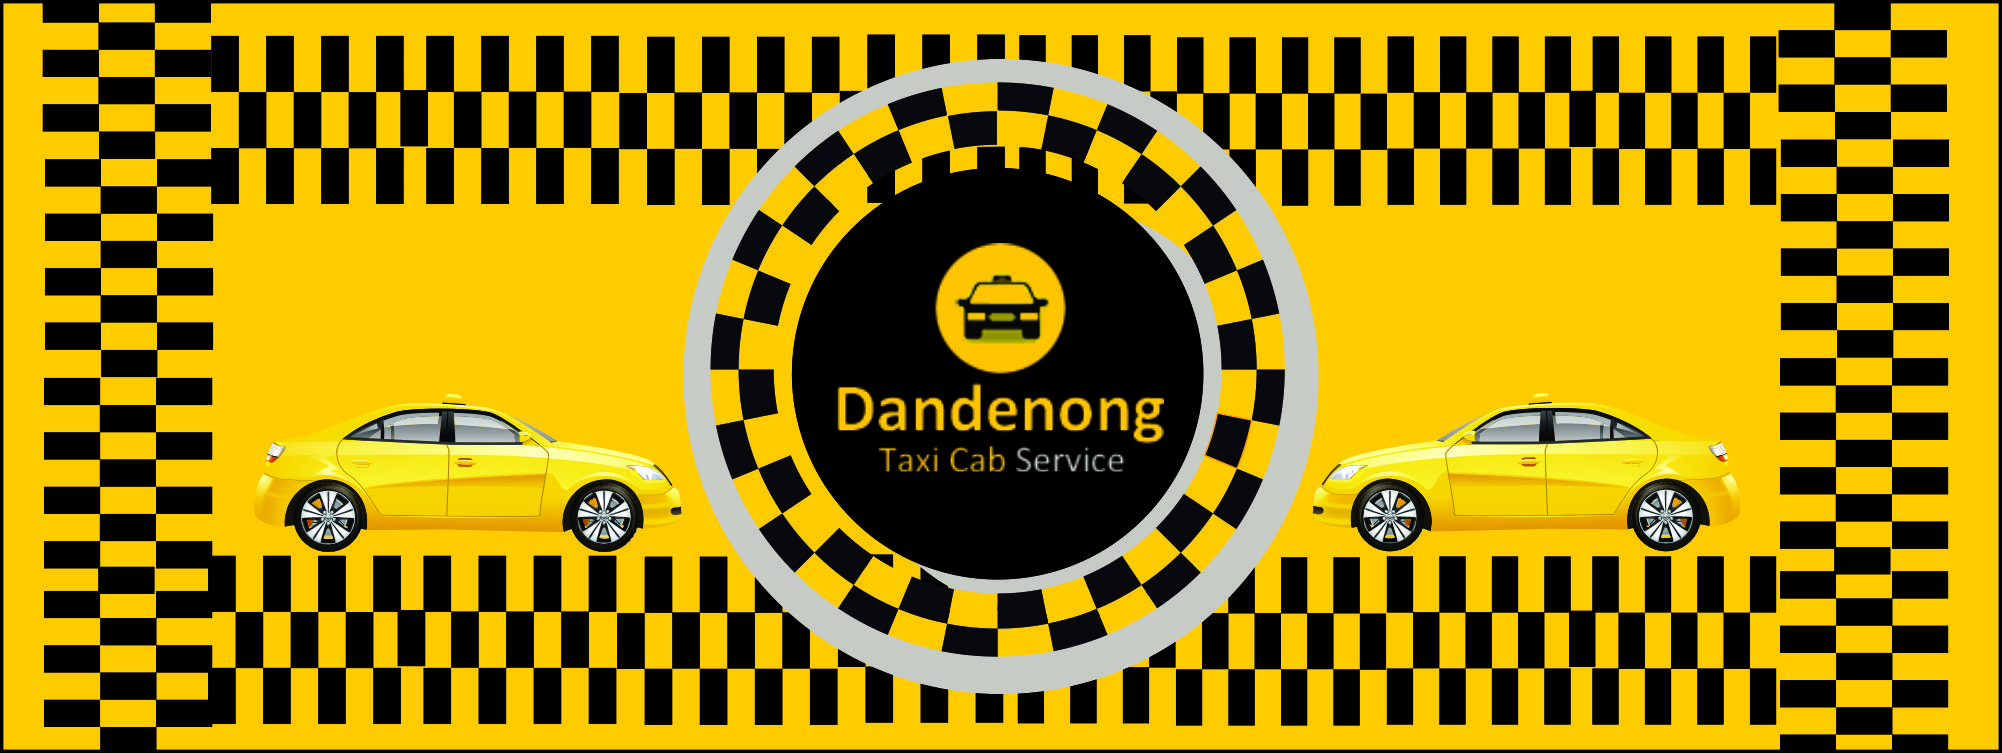 How to get from Melbourne airport to Dandenong?